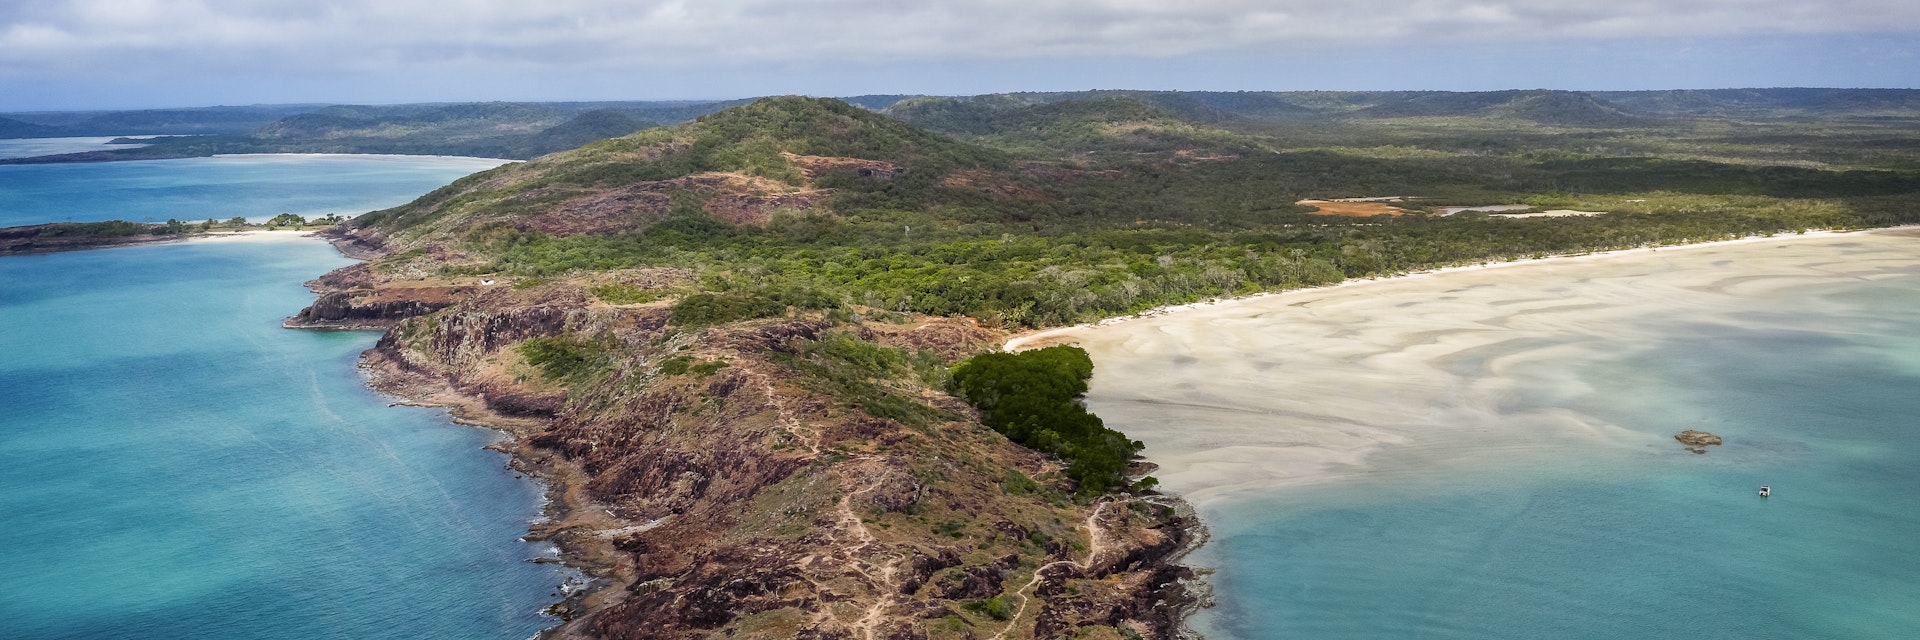 The tip of Cape York from above